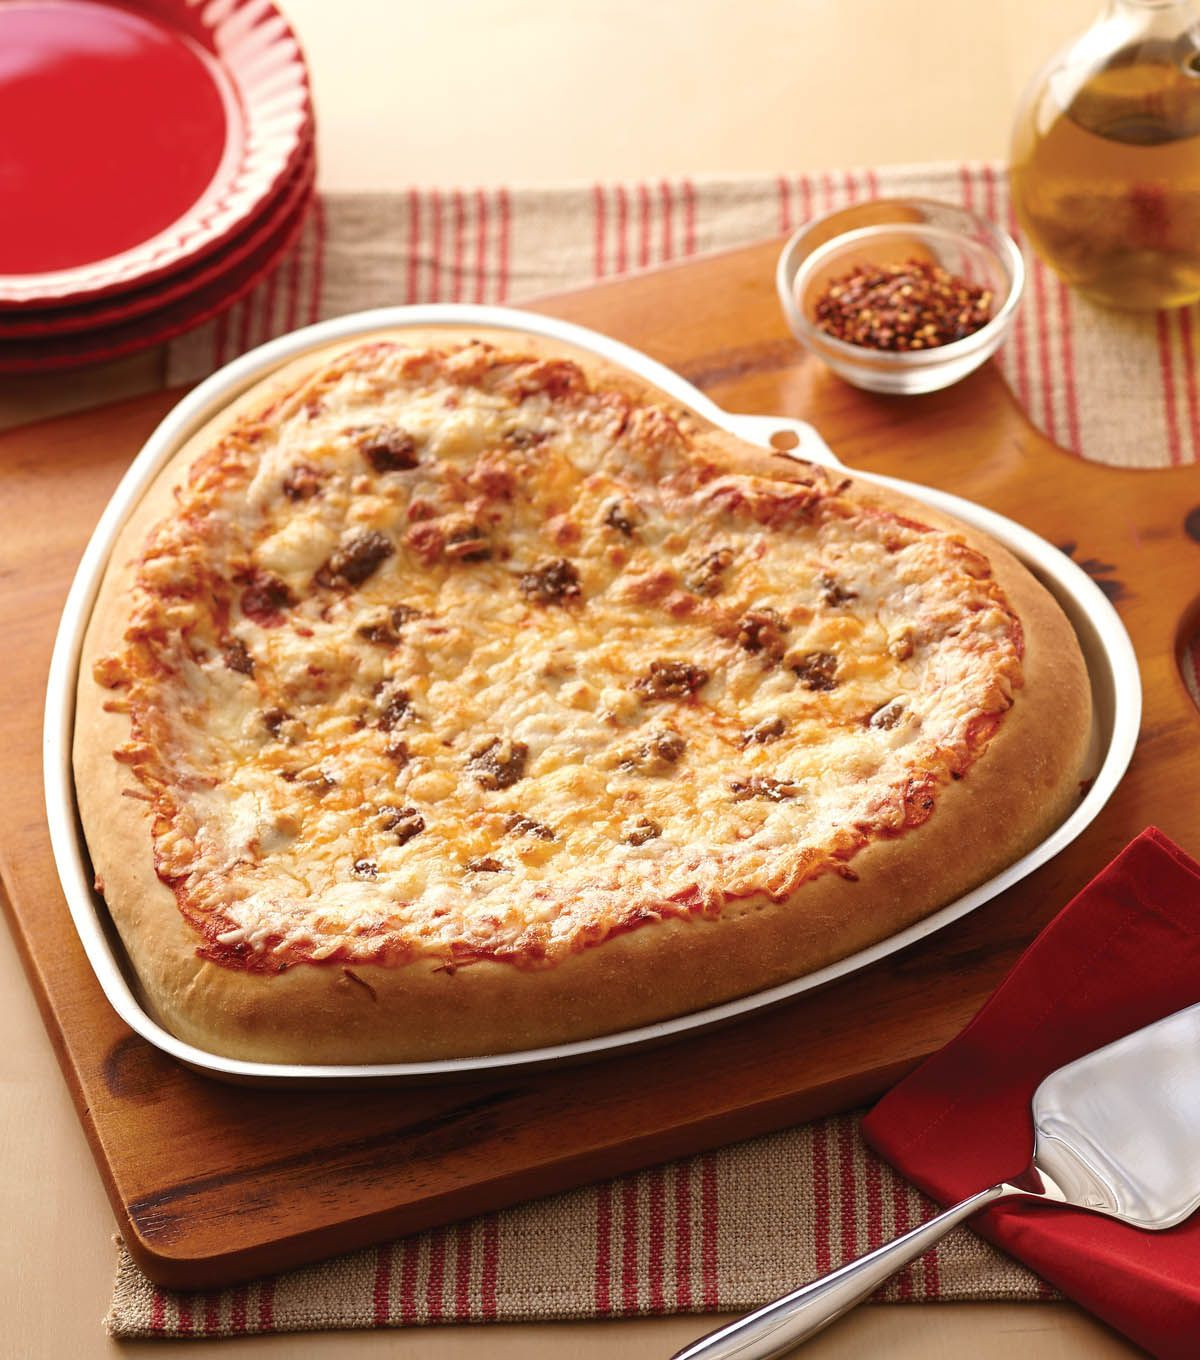 New Years Day Dinner Ideas
 Heart Pizza For New Year s Eve